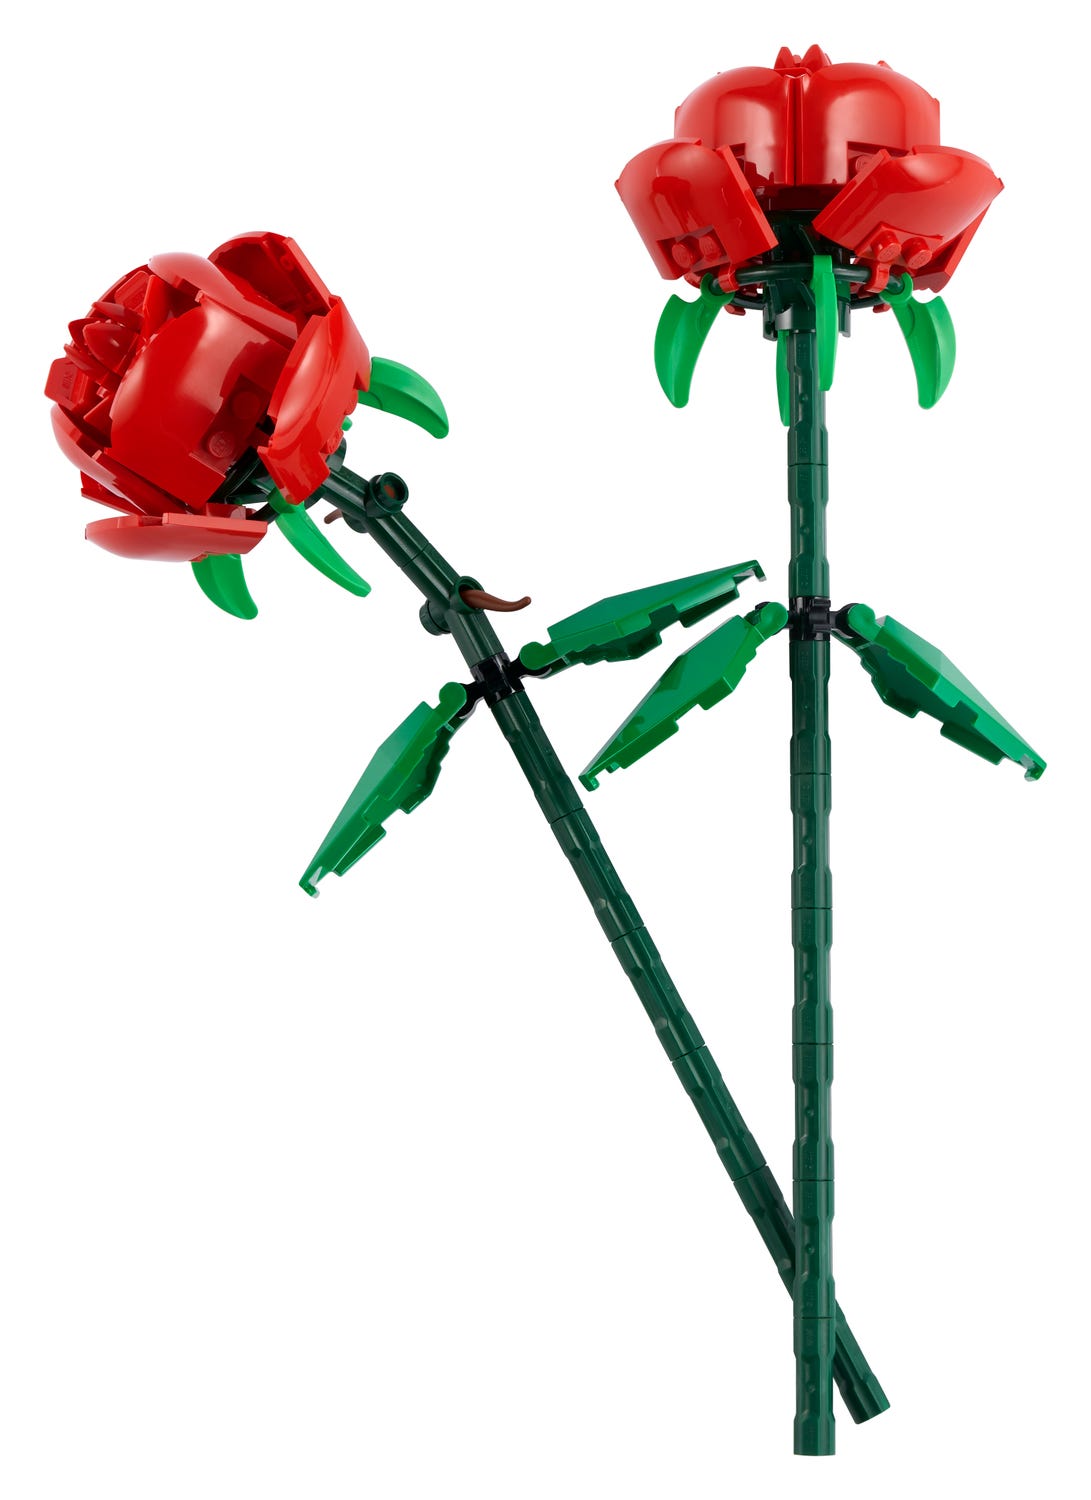 Roses (40460) $12.99 & Tulips (40461) $9.99 - Available now at Lego.com